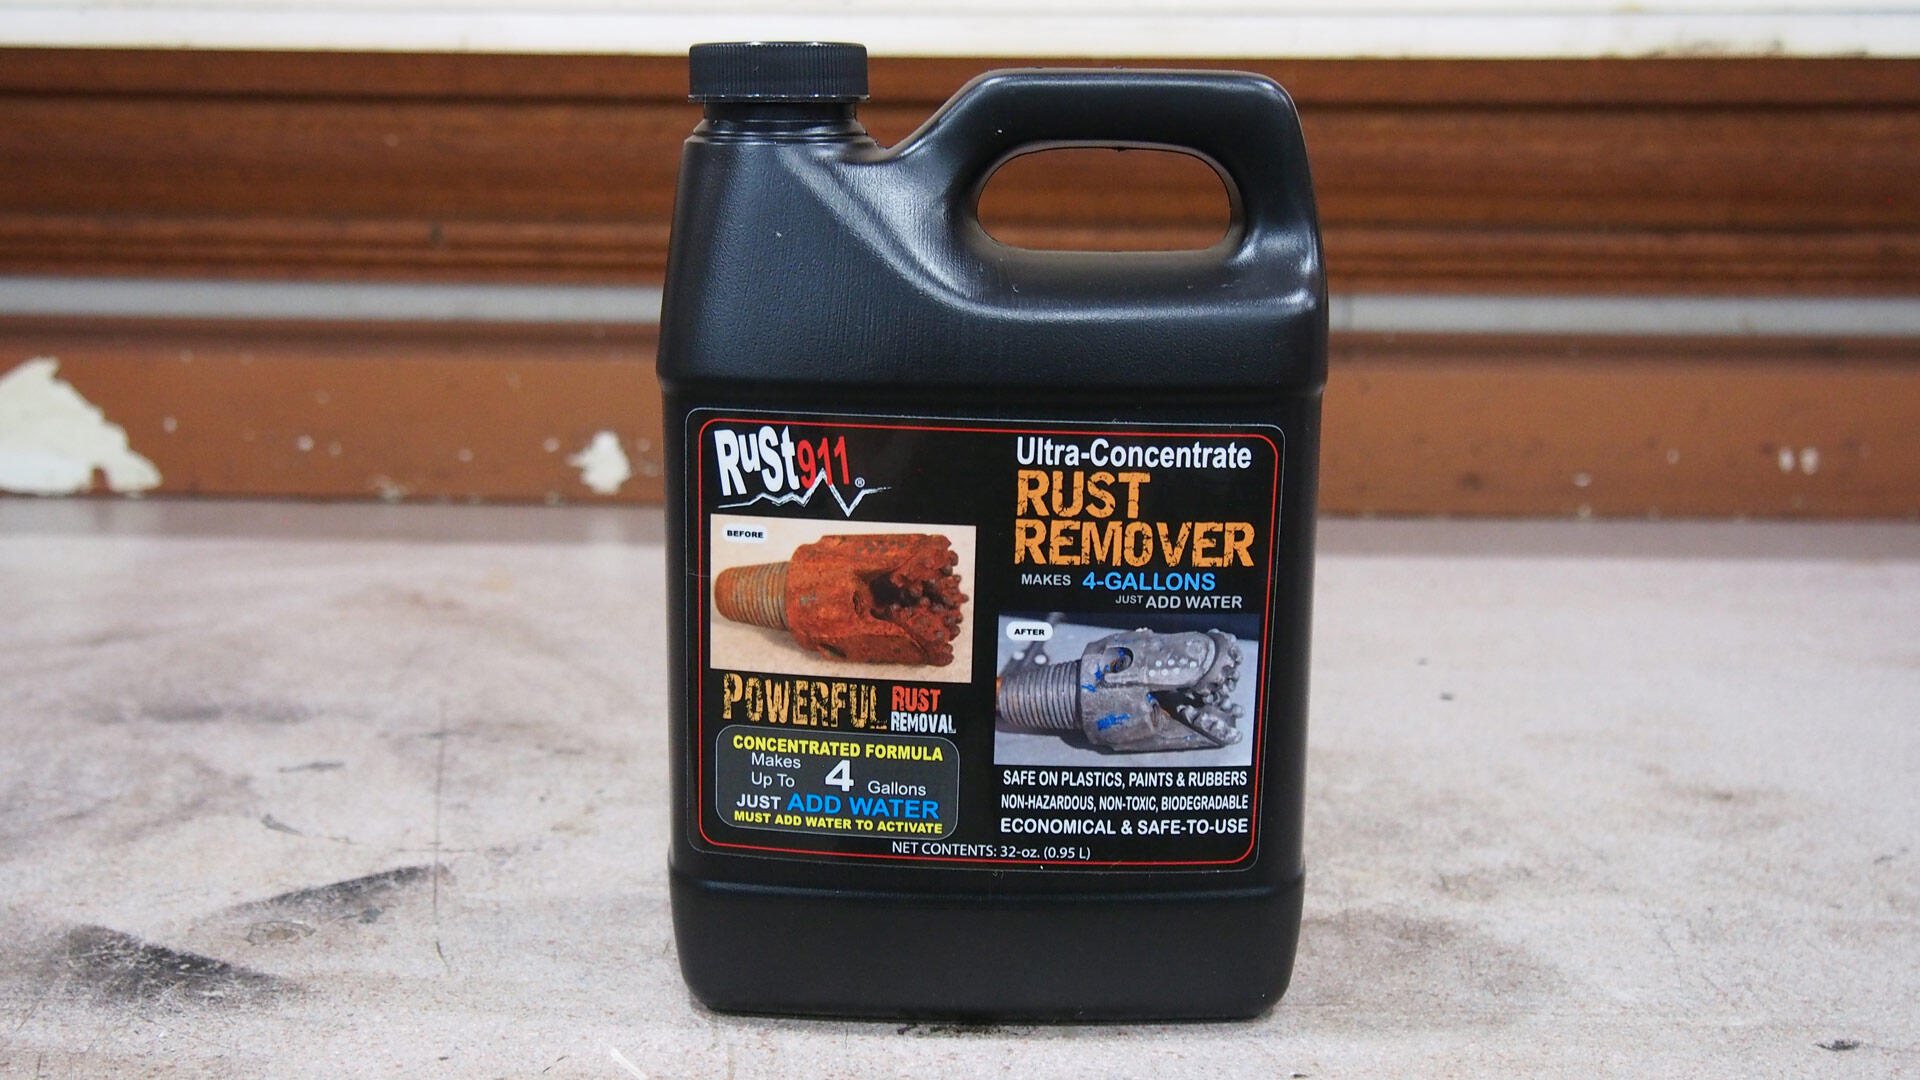 WHICH RUST REMOVING PRODUCT WORKS BEST? - Q20